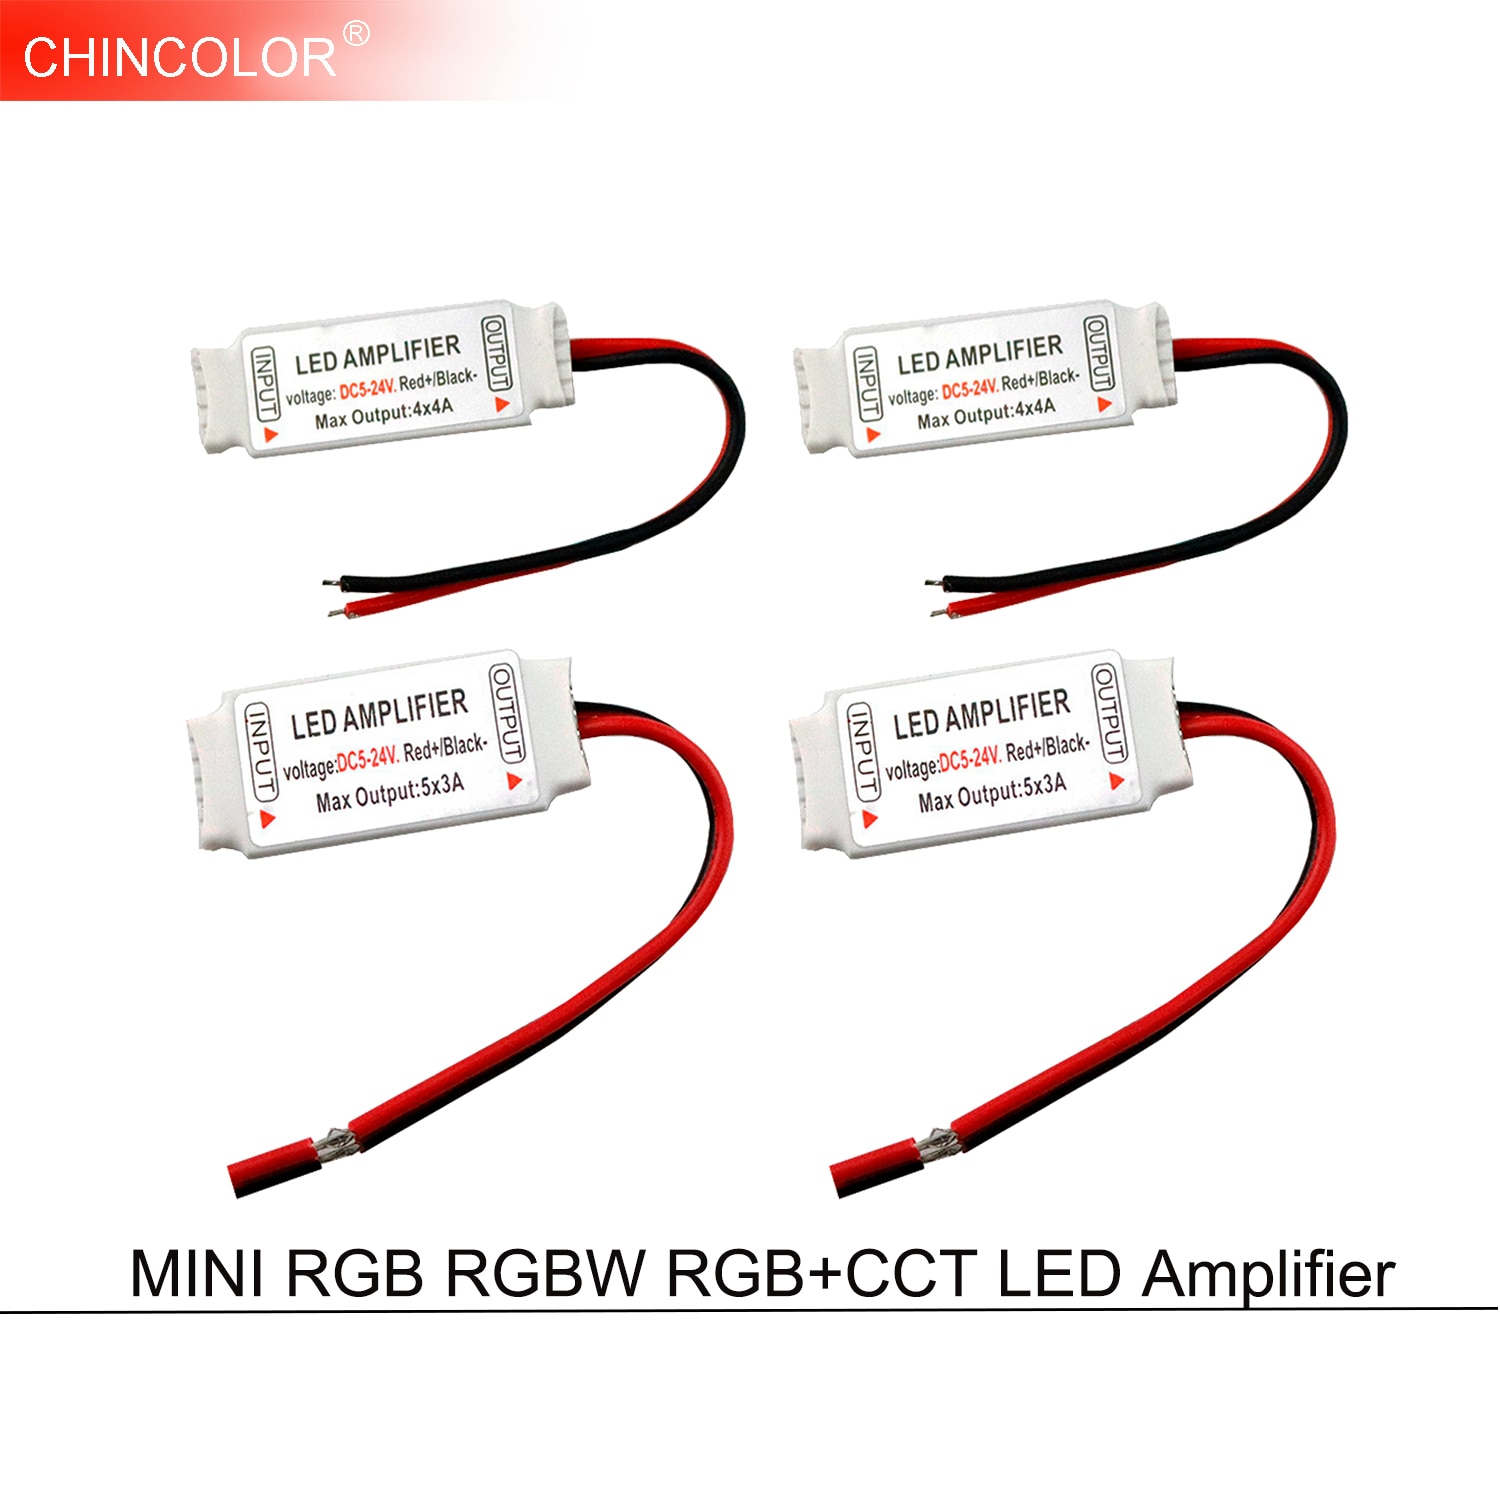 Led Versterker Controller DC5-24V Signaal Repeater Accessoire voor RGB RGBW RGB + CCT RGBWW RGBCW 5050 3528 Led Strip Licht 4-6Pin JQ